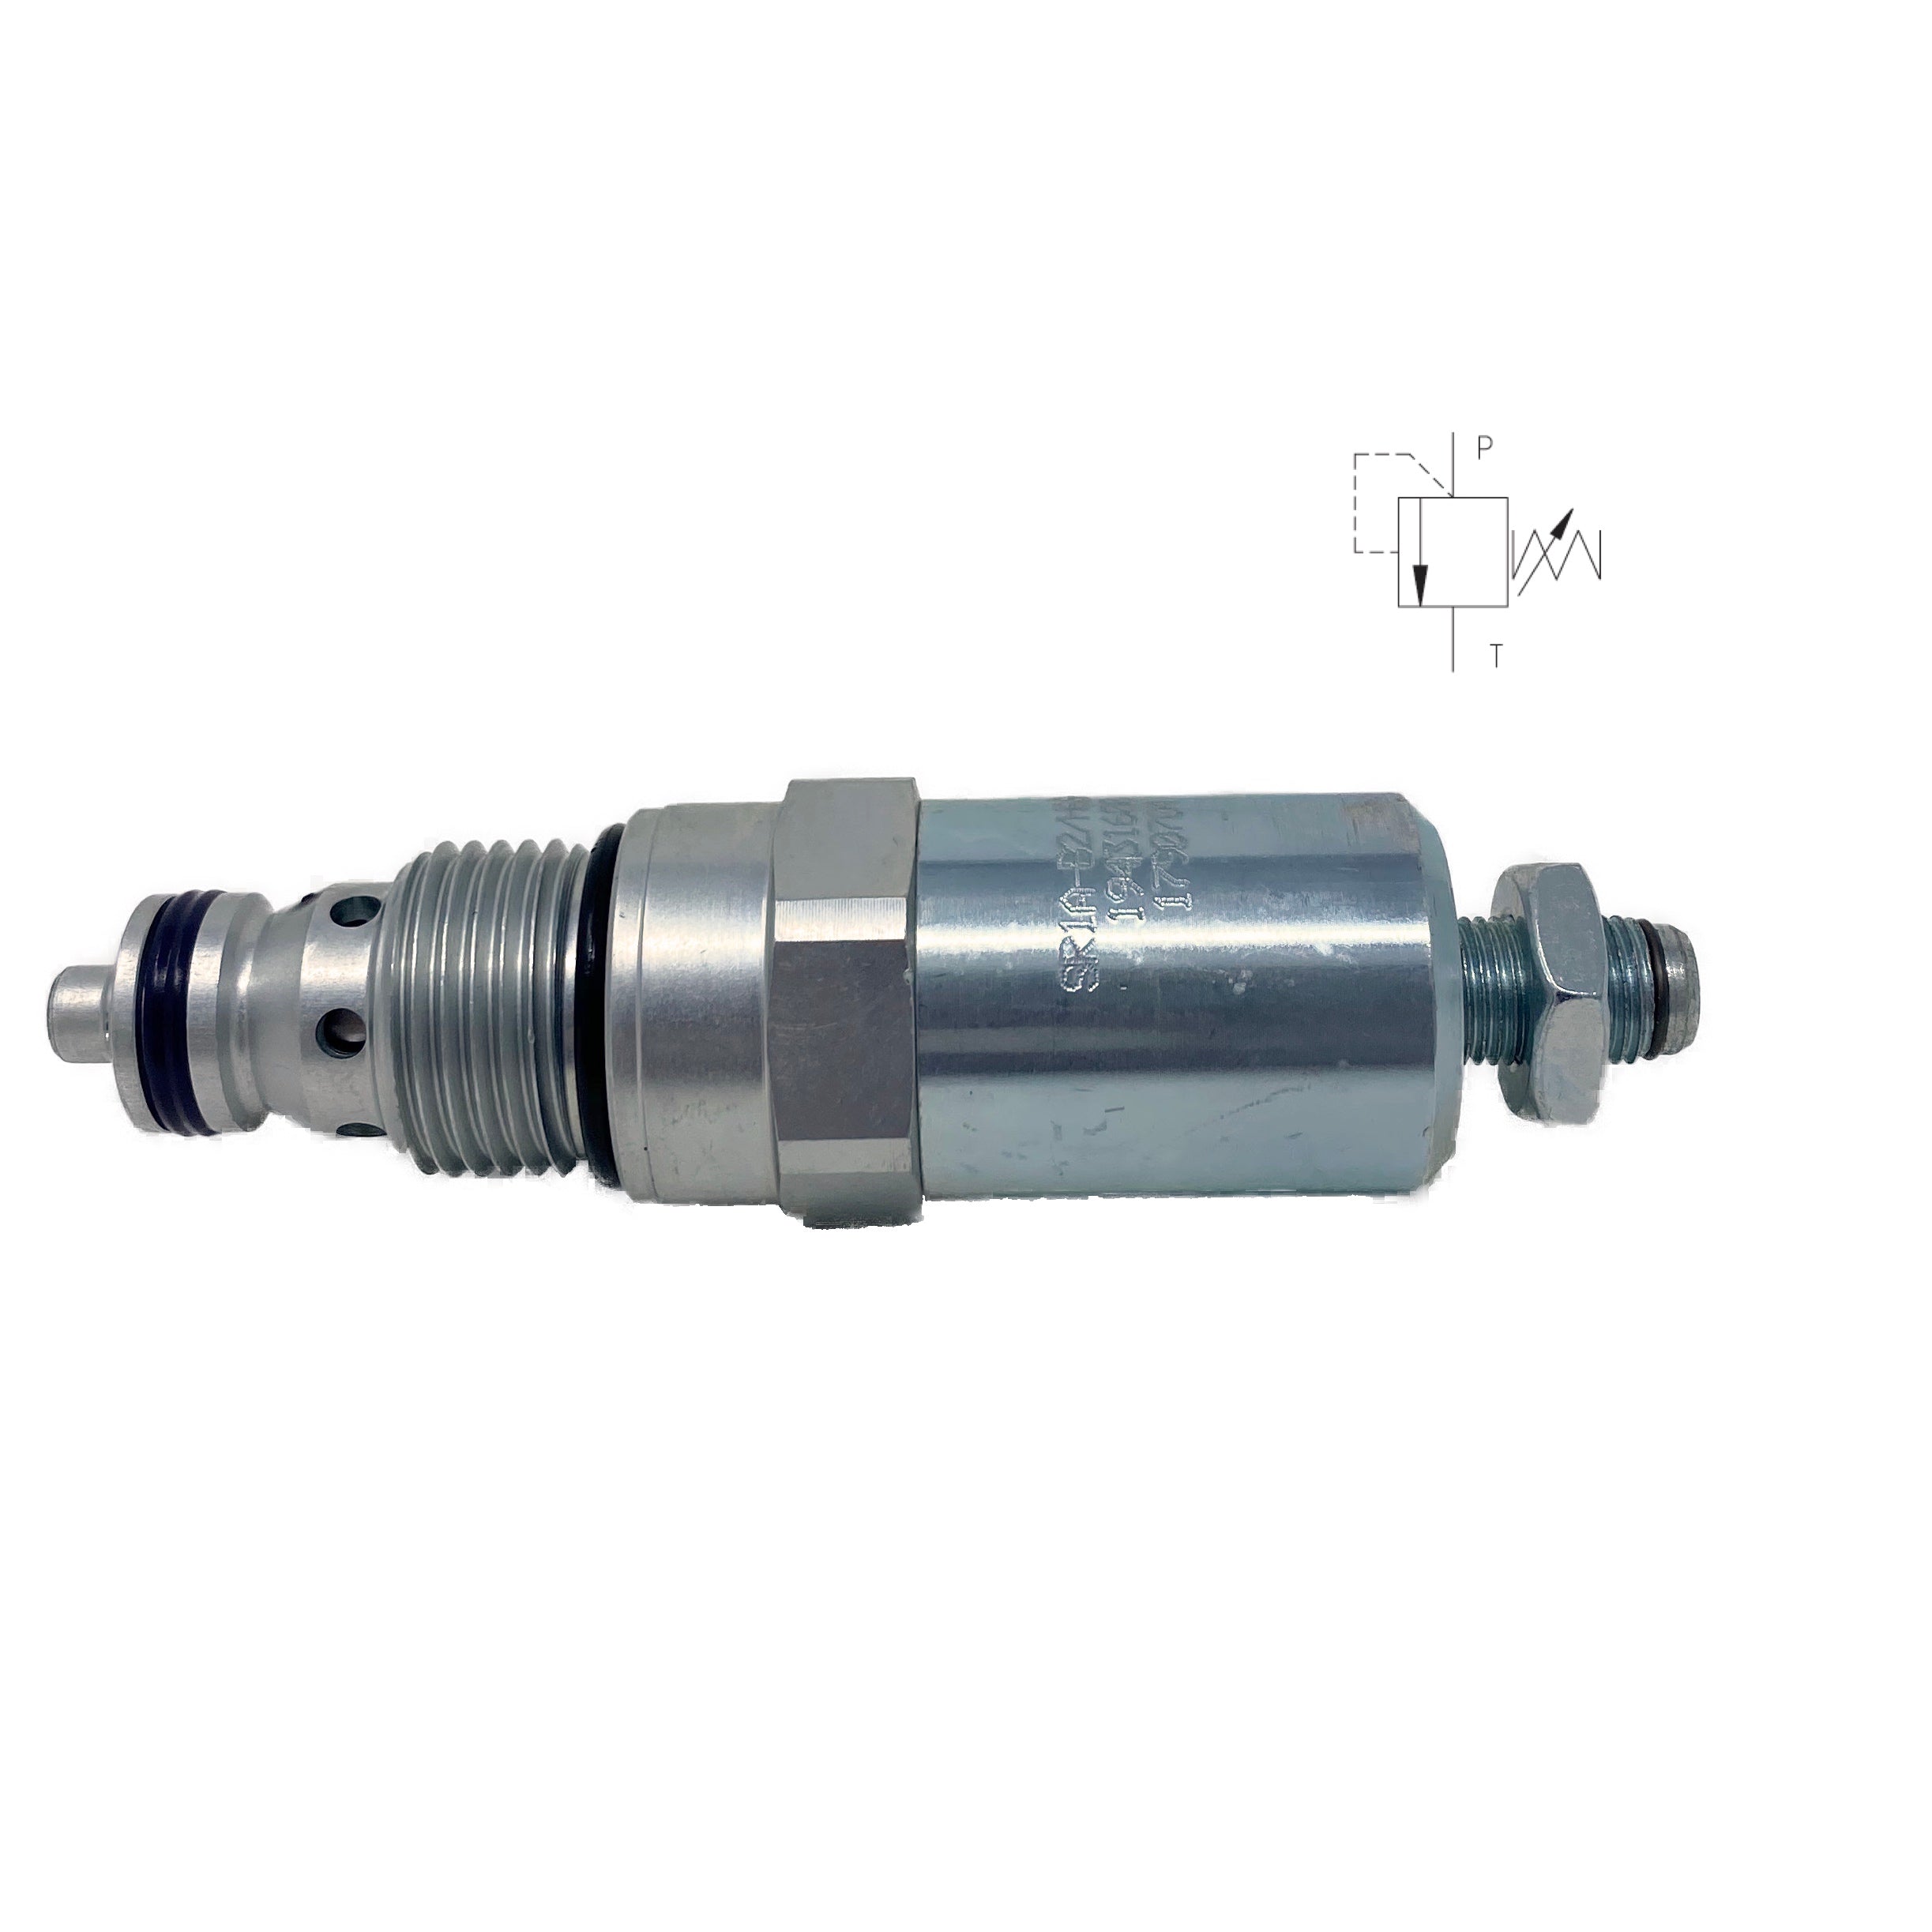 SR1A-B2/H6S-A : Argo Pressure Relief Valve, Poppet Type, Direct Acting, 16 GPM, 6100psi, Allen Key Screw, Adjustable Up to 910psi, Fits C-10-2 Cavity